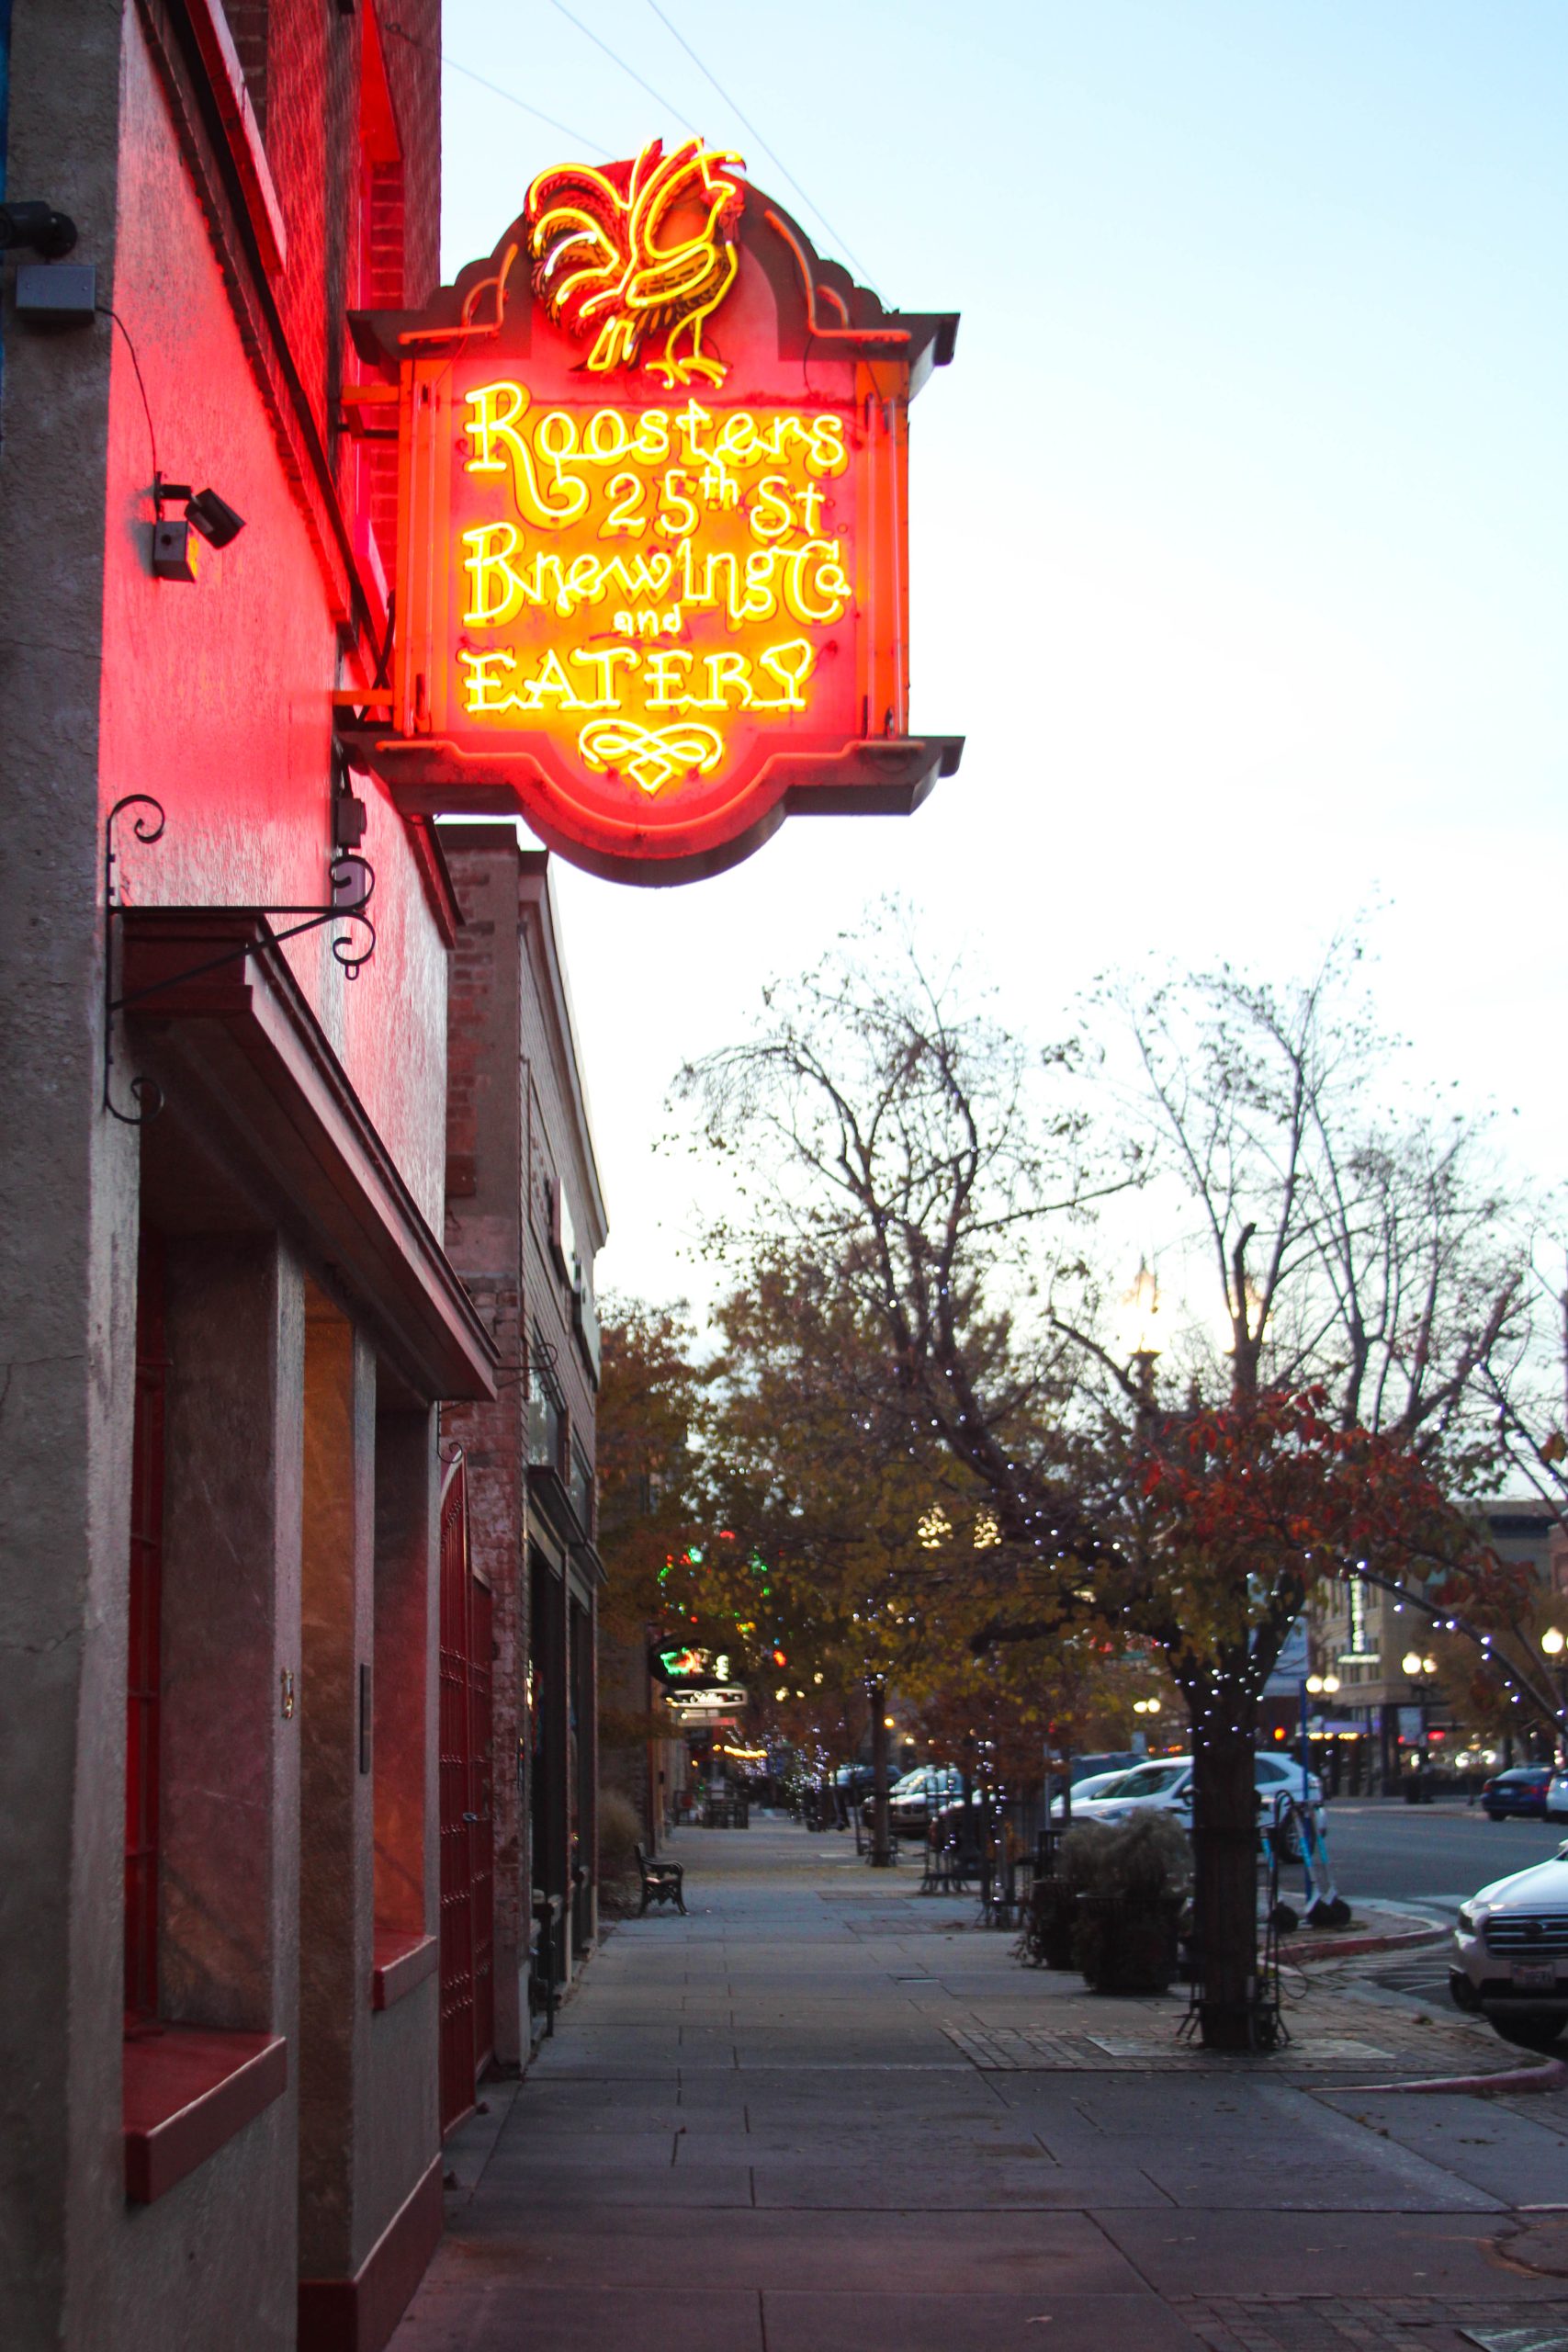 The Roosters Brewing Co. and Eatery sign hanging over its storefront on Historic 25th Street.